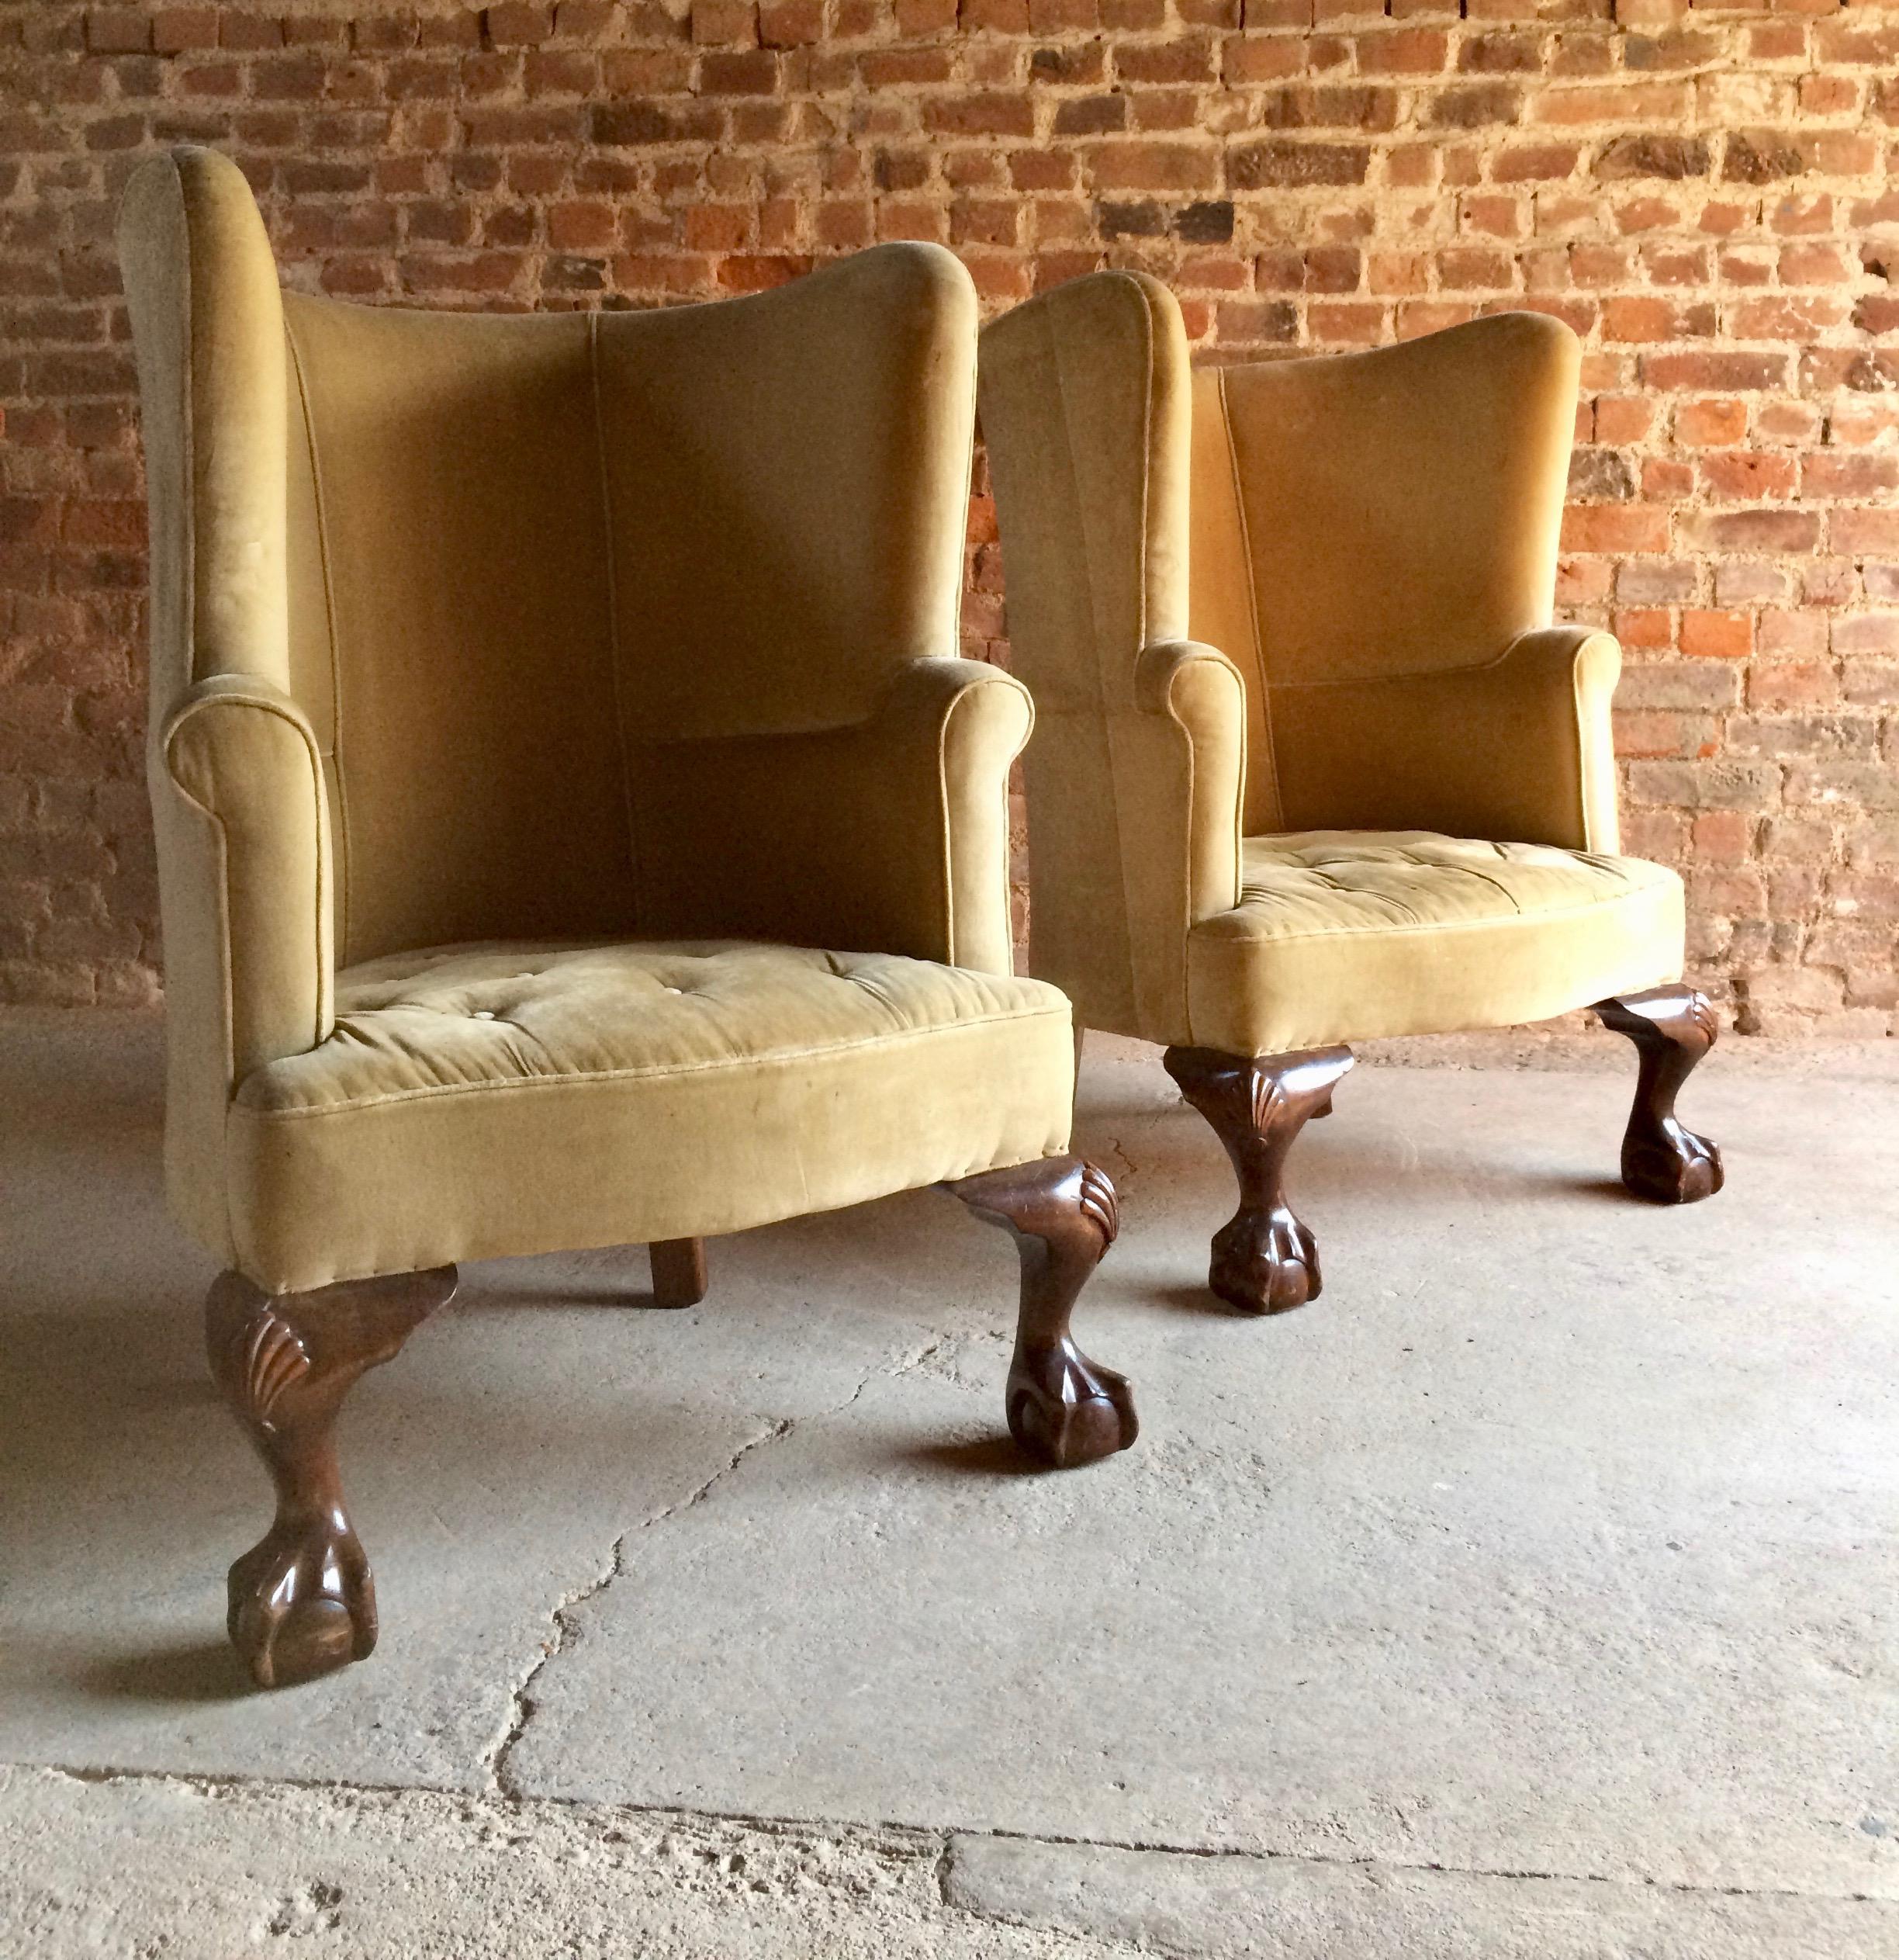 A stunning pair of 19th century George II style mahogany barrel back porters armchairs dating to circa 1860, the chairs upholstered in gold velvet, standing on oversized carved ball and claw cabriole legs, these chairs are breathtakingly beautiful